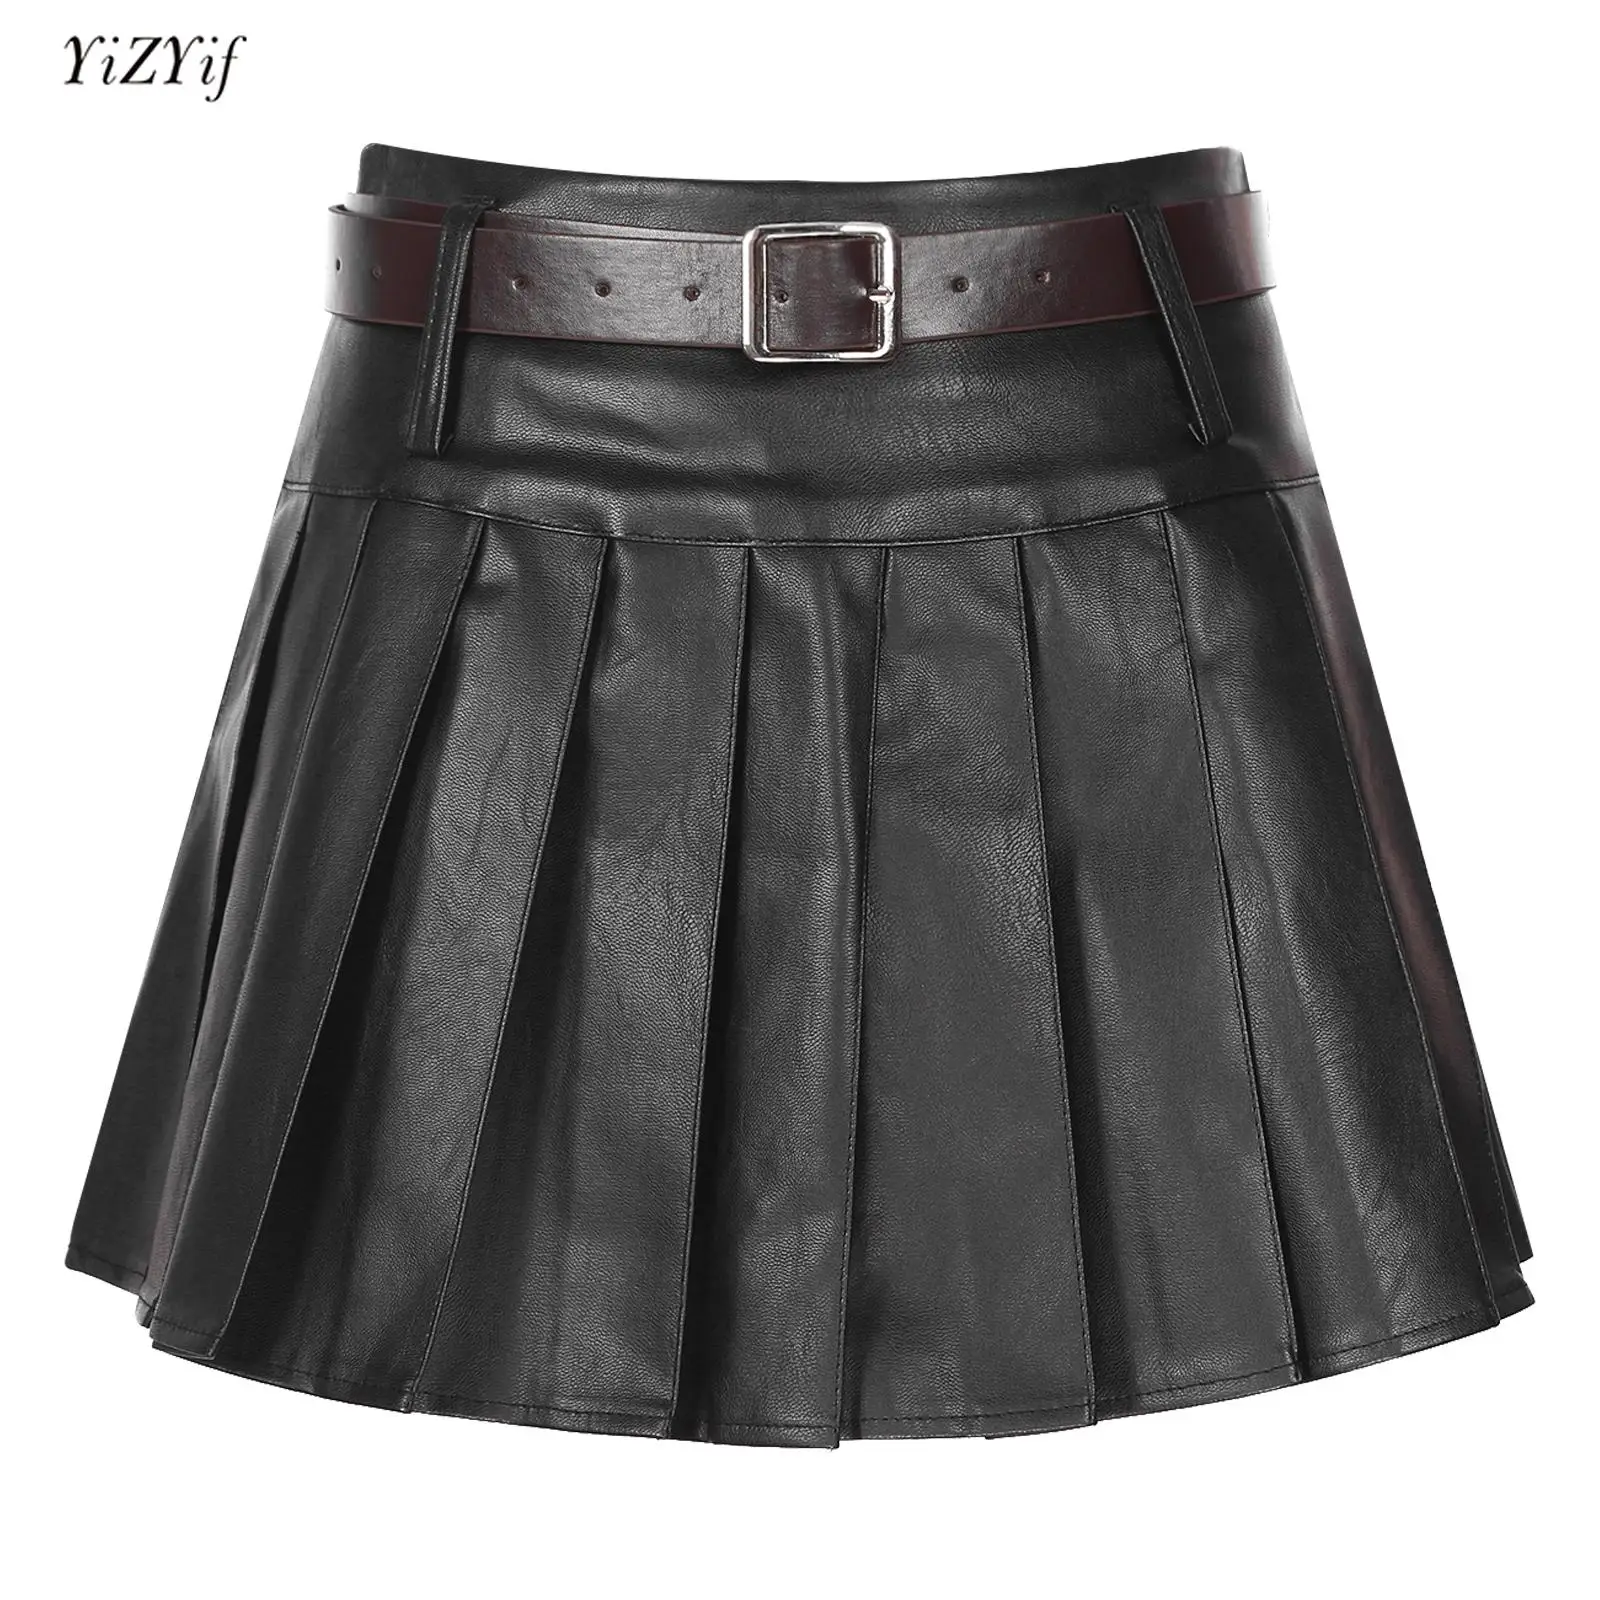 Womens Faux Leather Pleated Skirt Fashion Clubwear High Waist Built-in Shorts Skirts with Adjustable Belt Party Street Dancewear fashionable summer men s sportswear short sleeved zippered polo shirt set with sports3dsplicing two piece casual street clothing